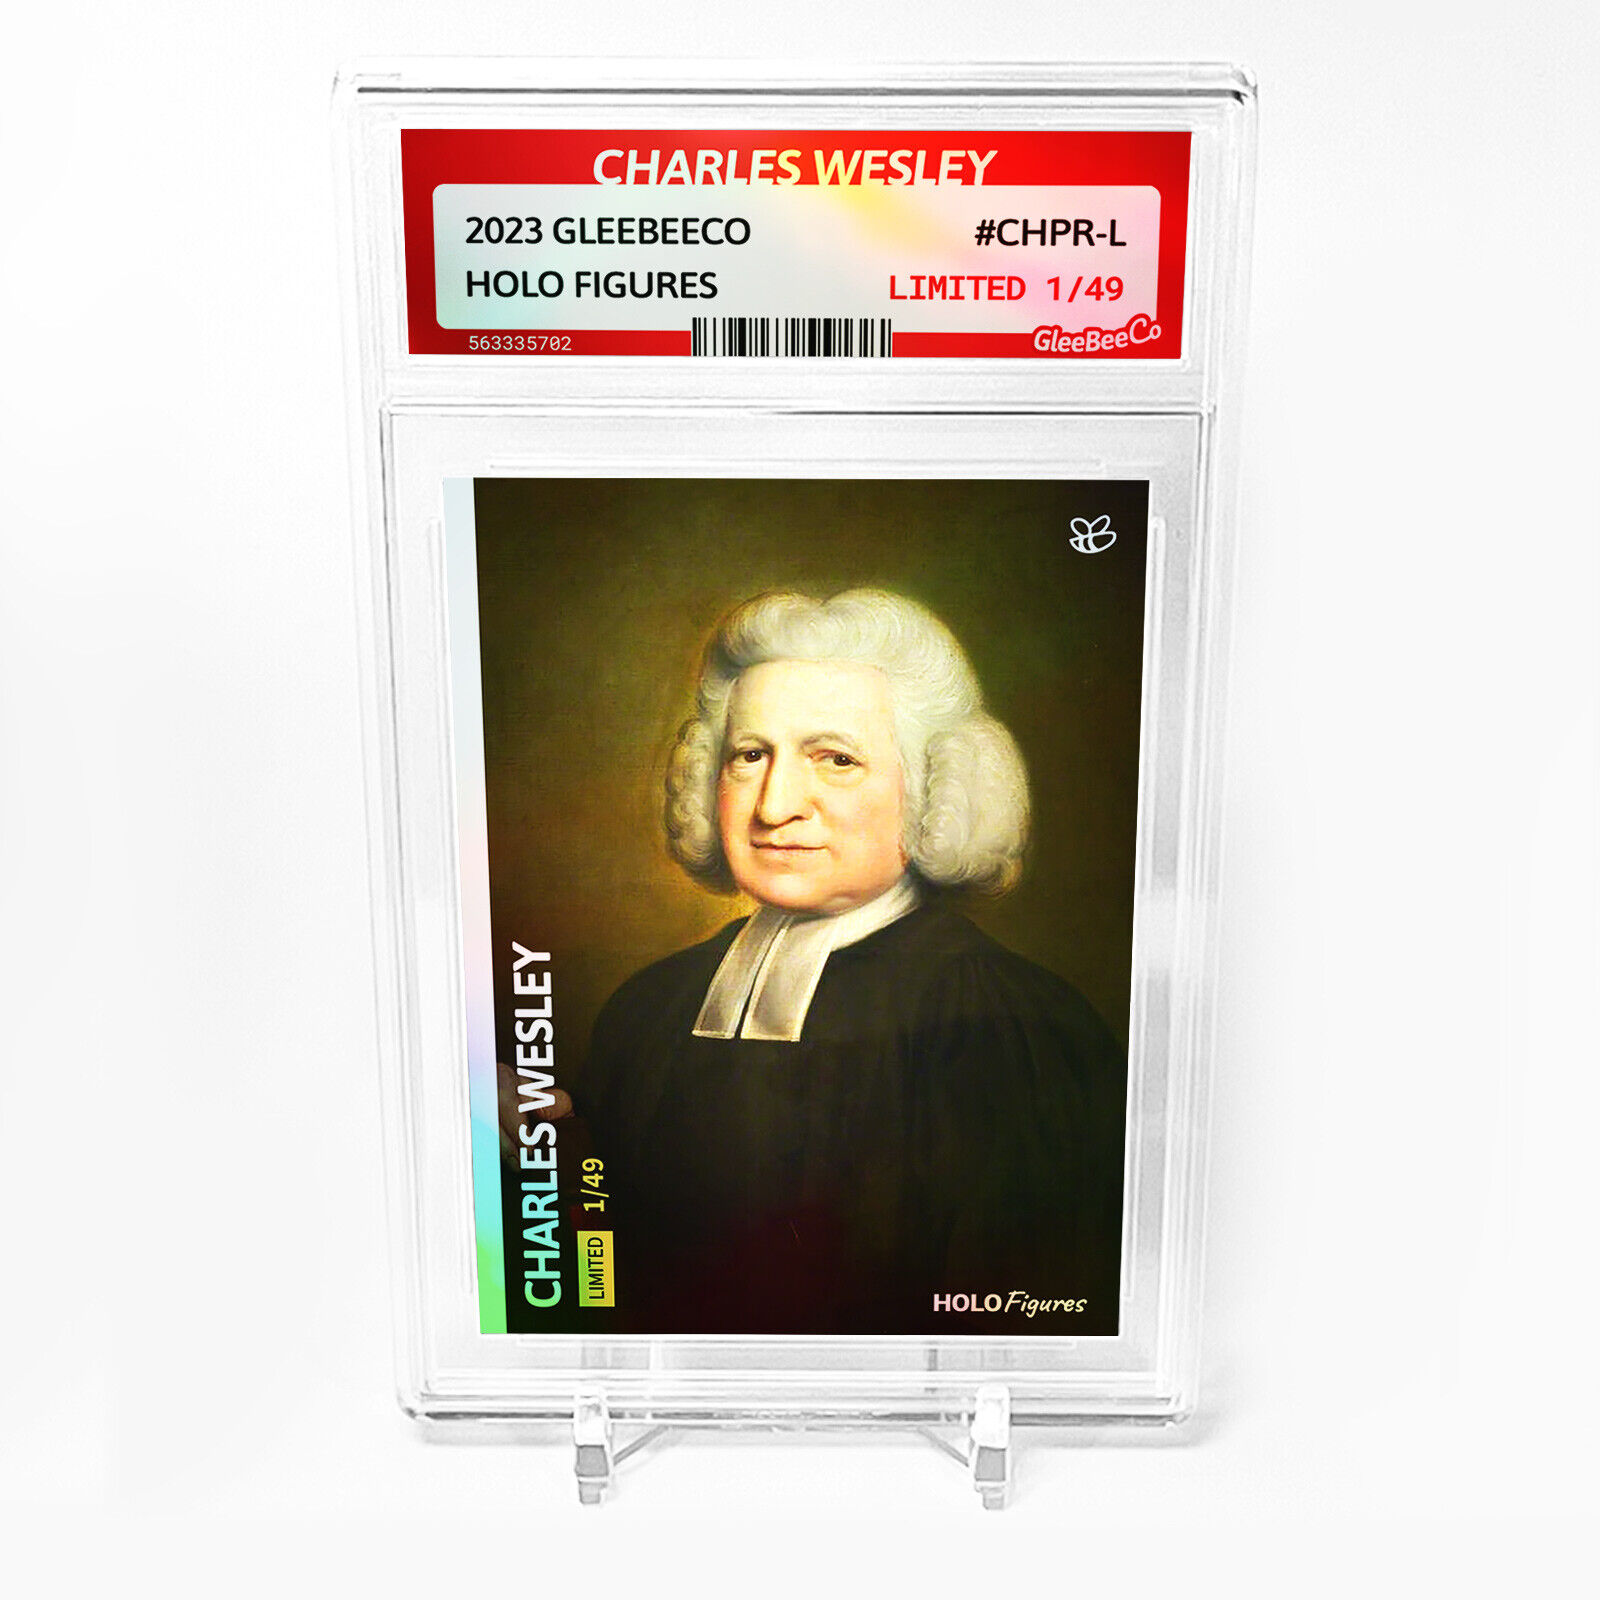 CHARLES WESLEY Art Card 2023 GleeBeeCo Holo Figures Slabbed #CHPR-L Only /49